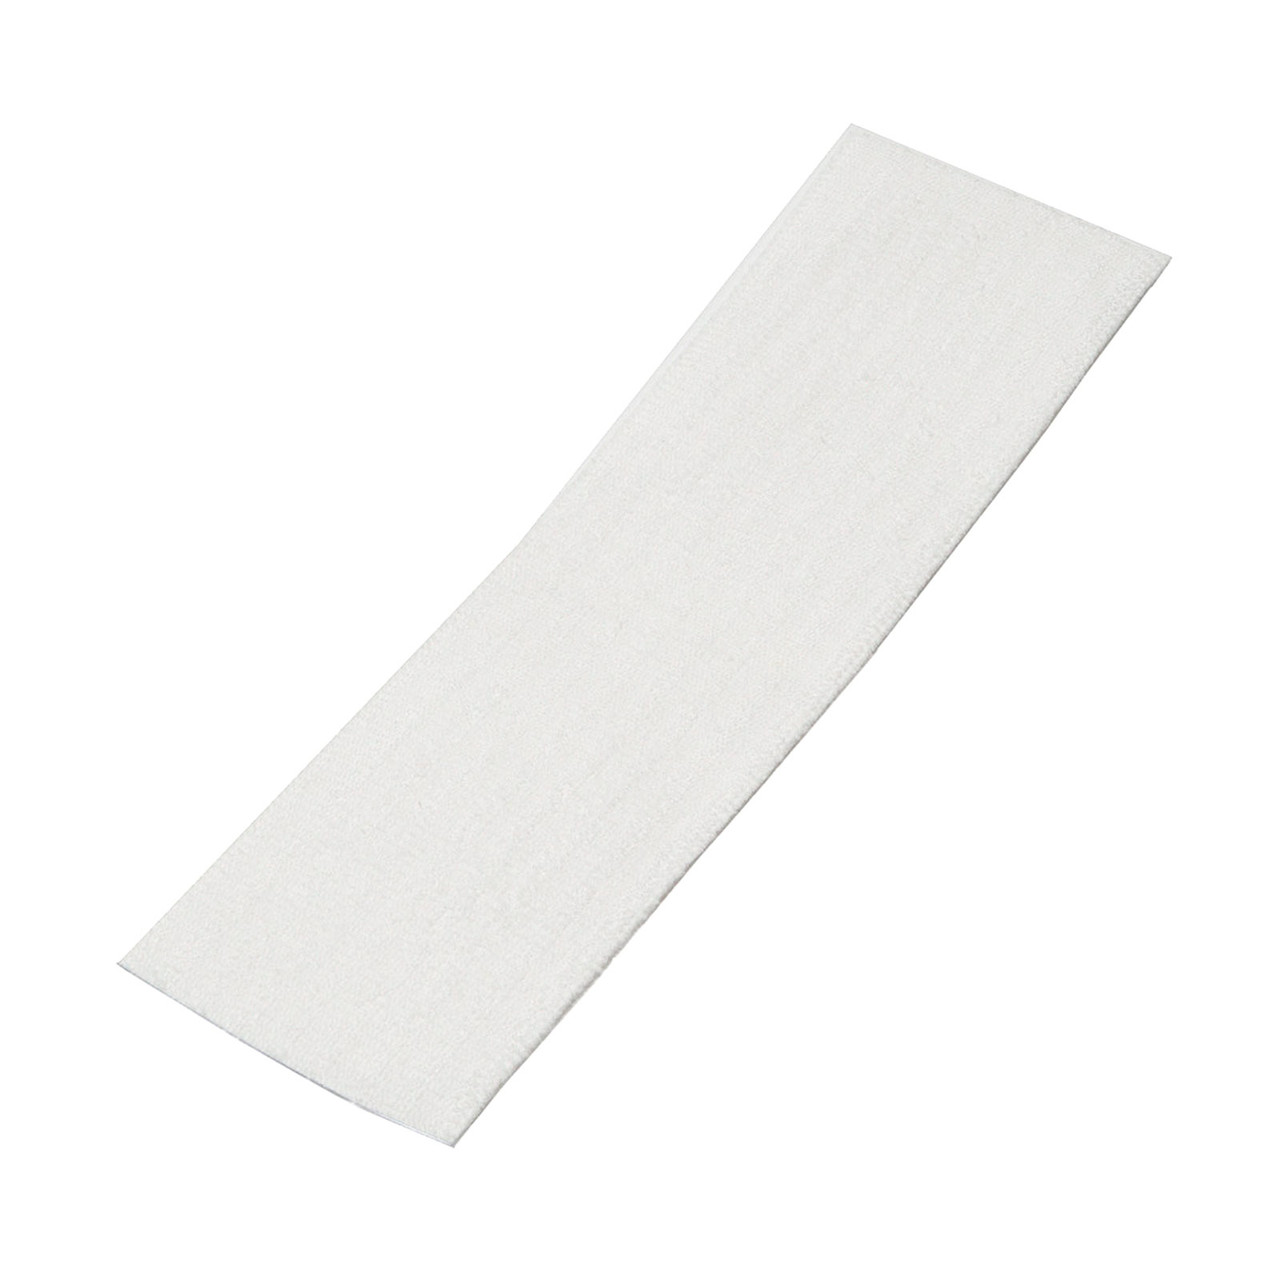 https://cdn11.bigcommerce.com/s-a5uwe4c7wz/images/stencil/1280x1280/products/545/1561/Microfiber-Mop-Pads-Disposable-18-Inch__09066.1585844553.jpg?c=1